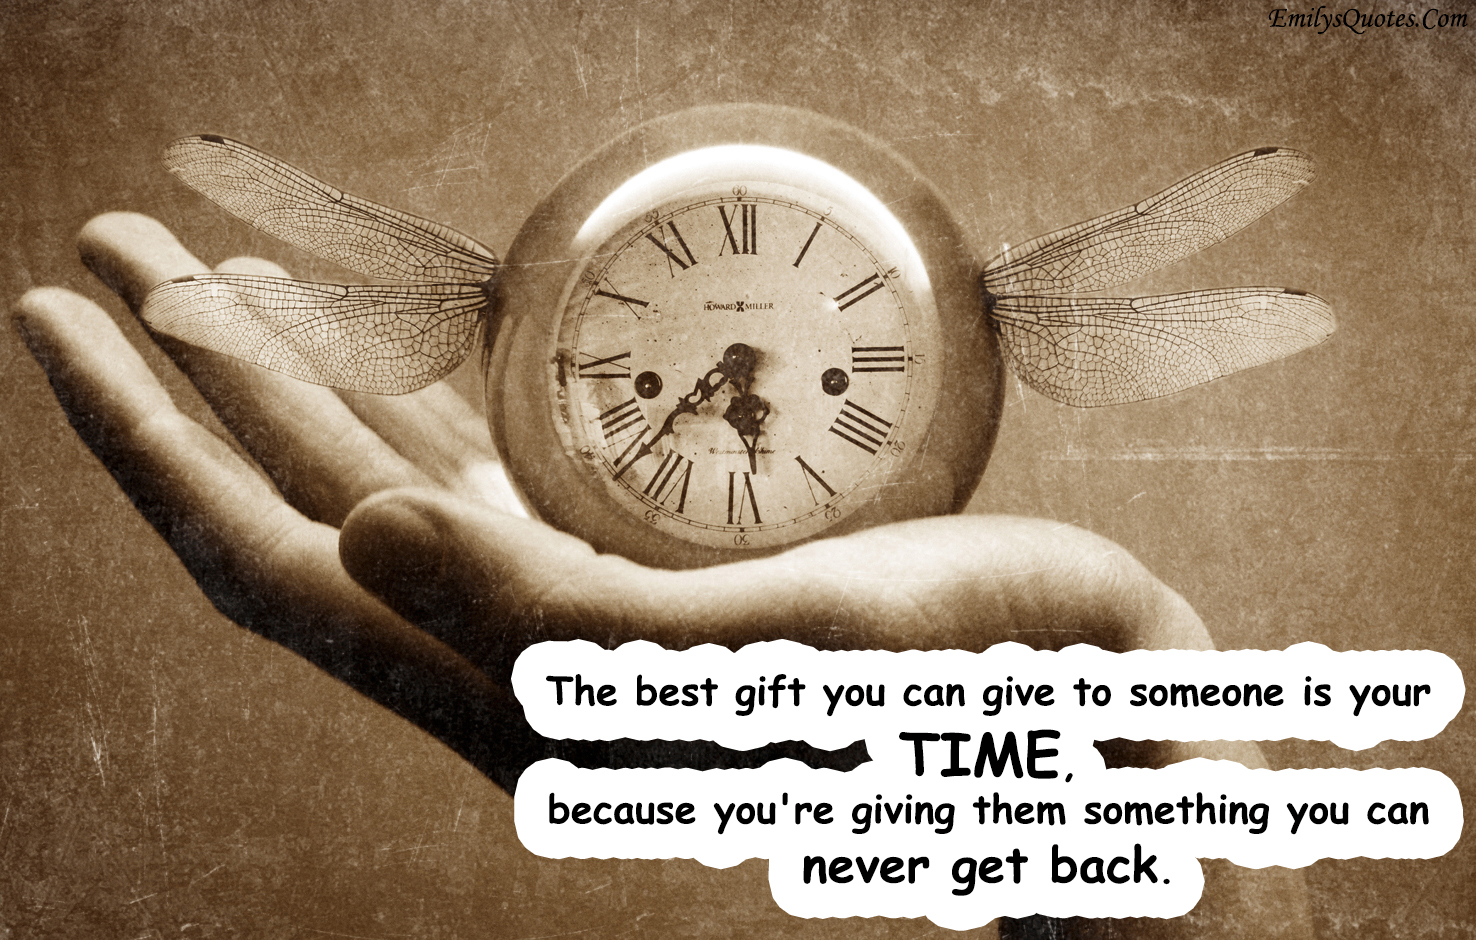 The best gift you can give to someone is your time, because